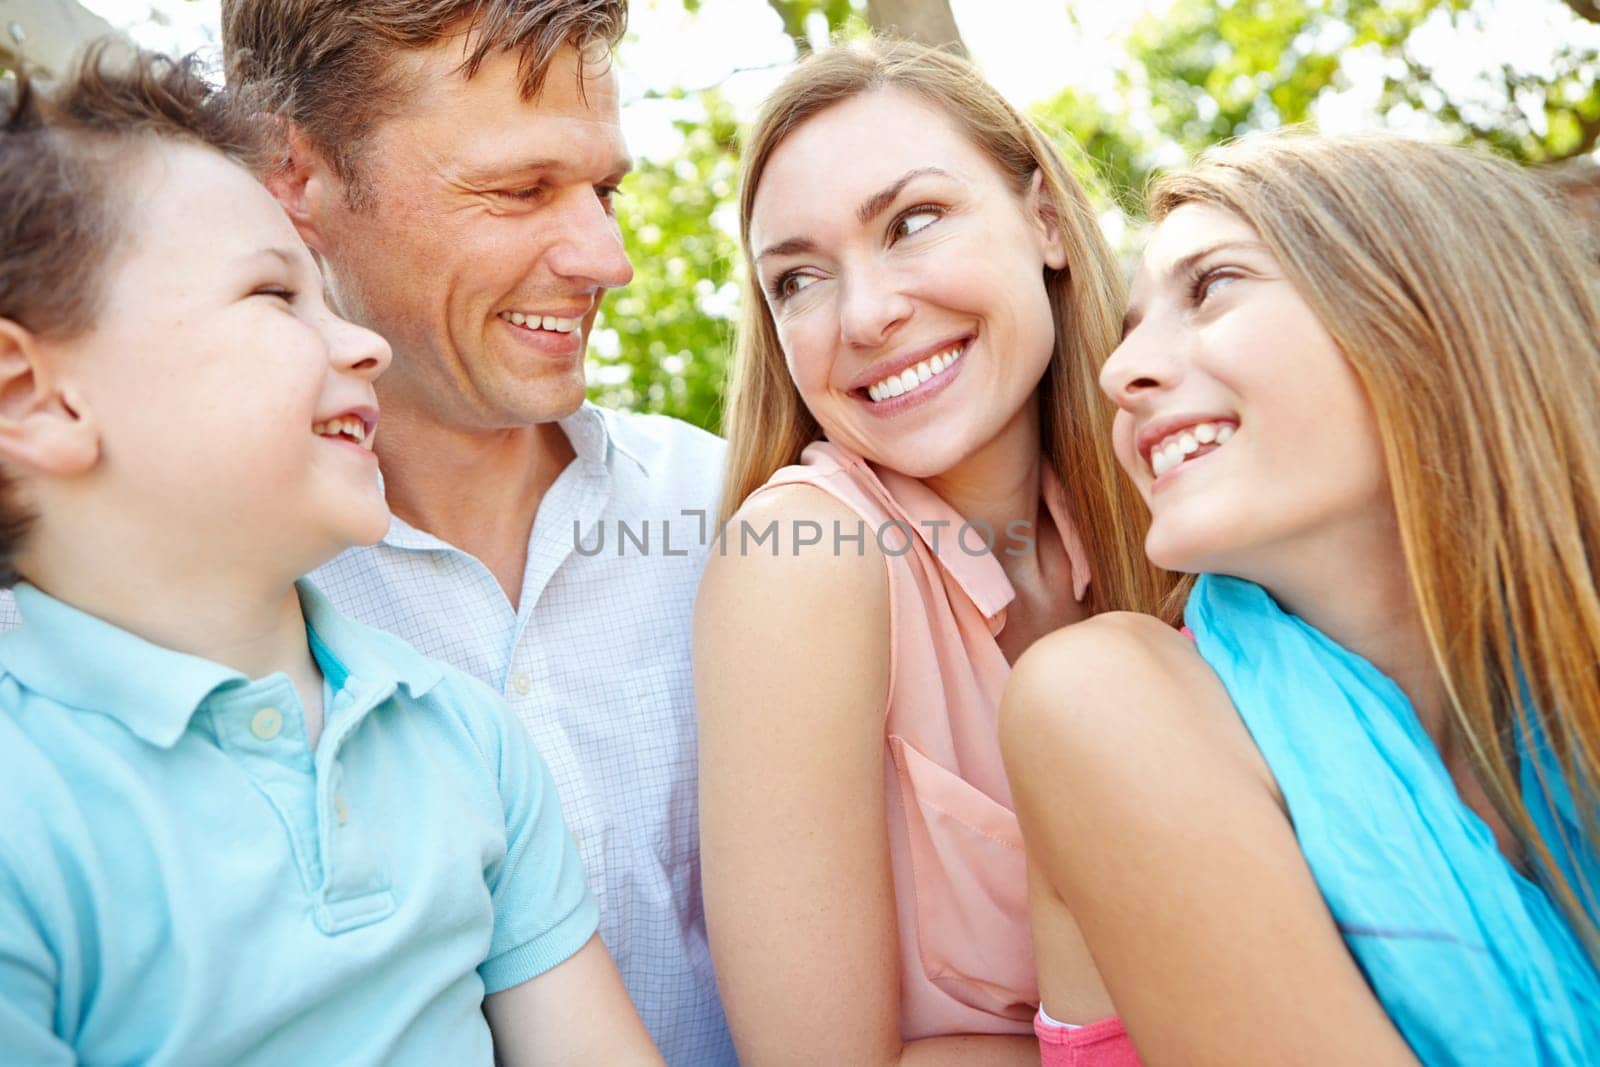 Quality family time in the park. Happy family smiling while outdoors